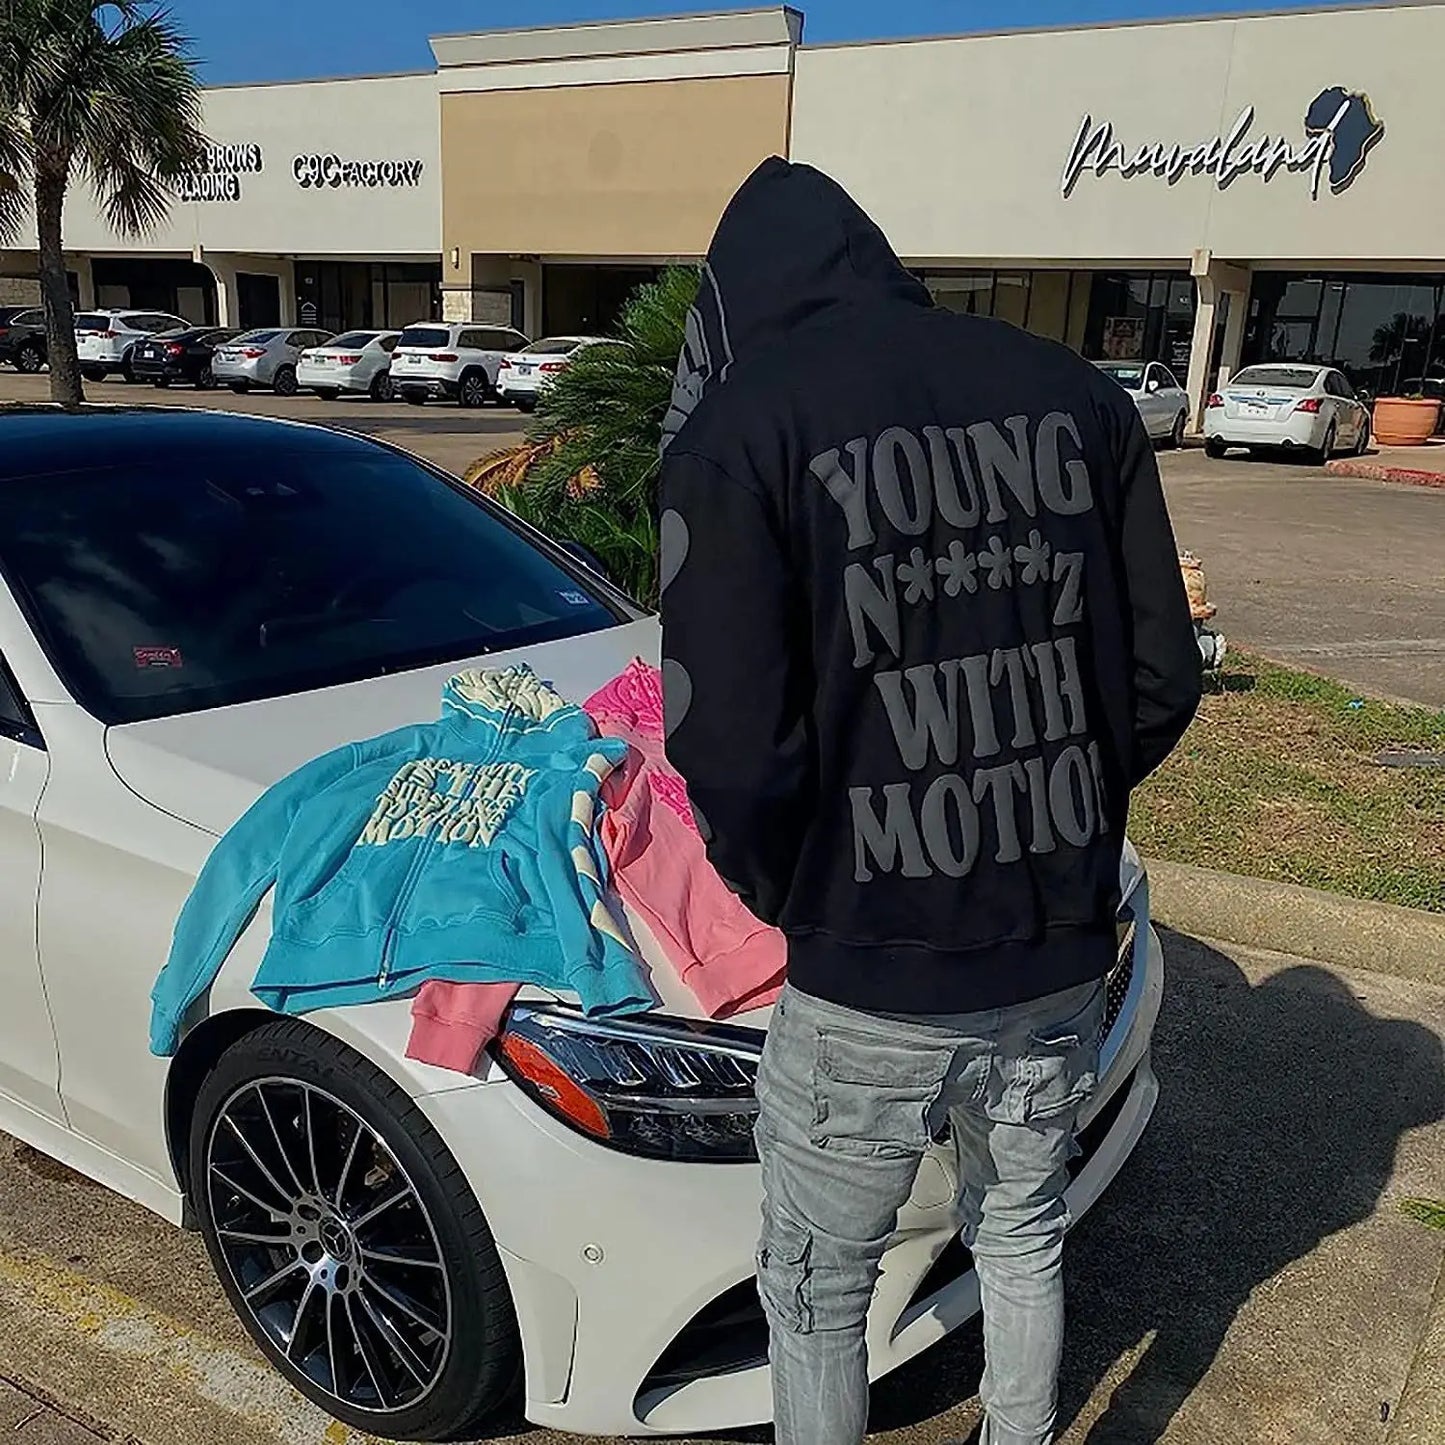 Young n****z with motion hoodies